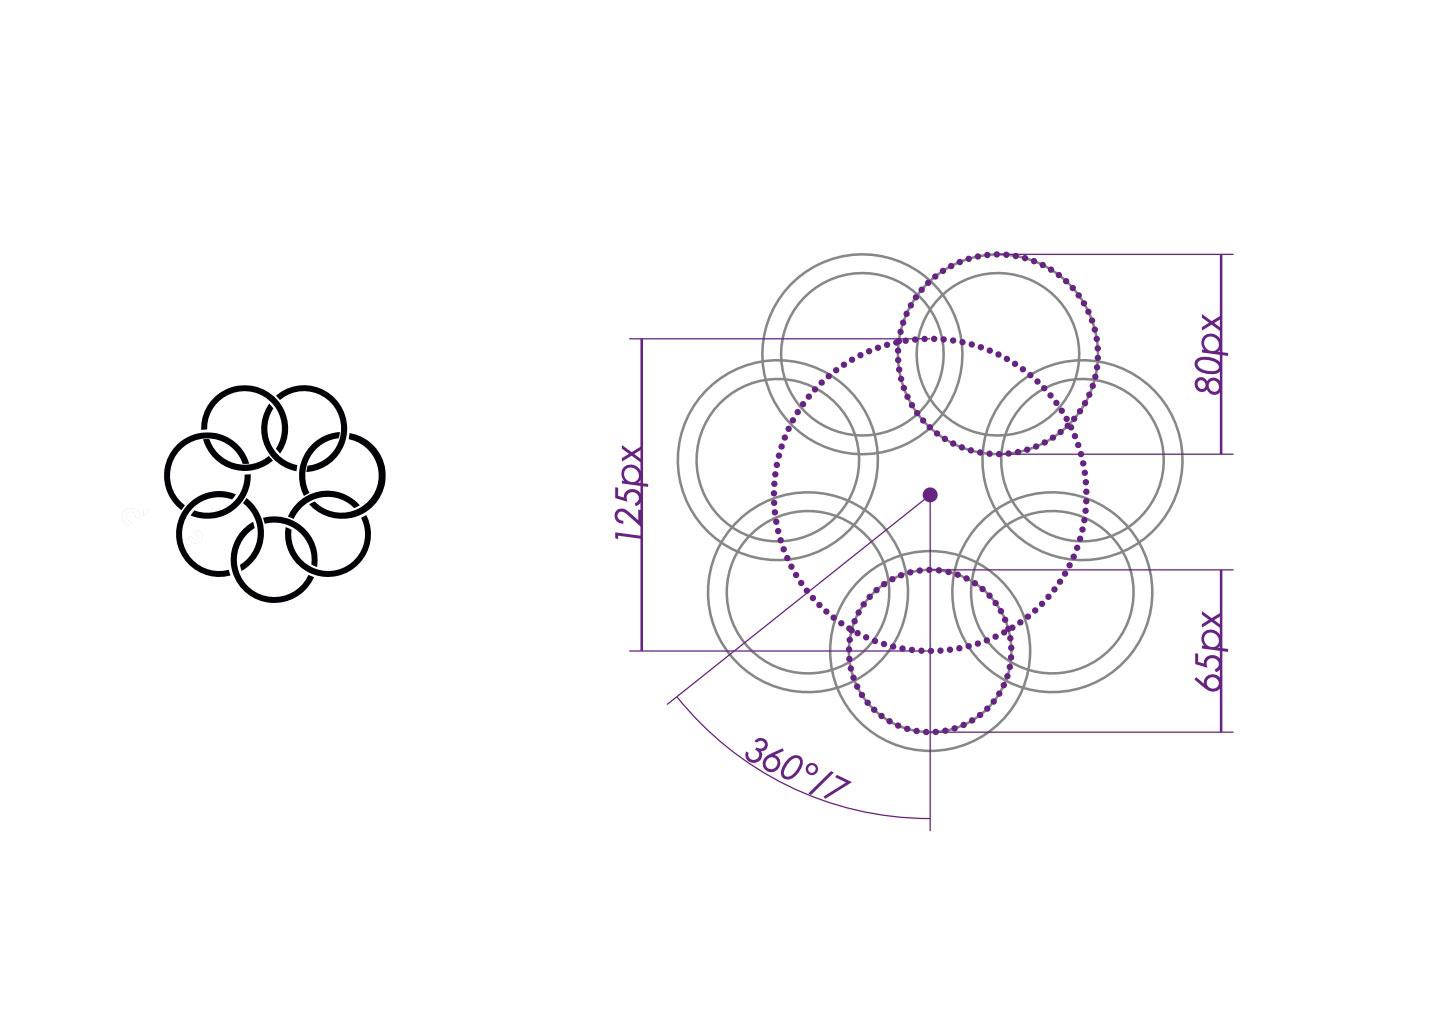 Illustration of a geometric construction featuring seven overlapping circles in a flower-like pattern, accompanied by technical drawing measurements.